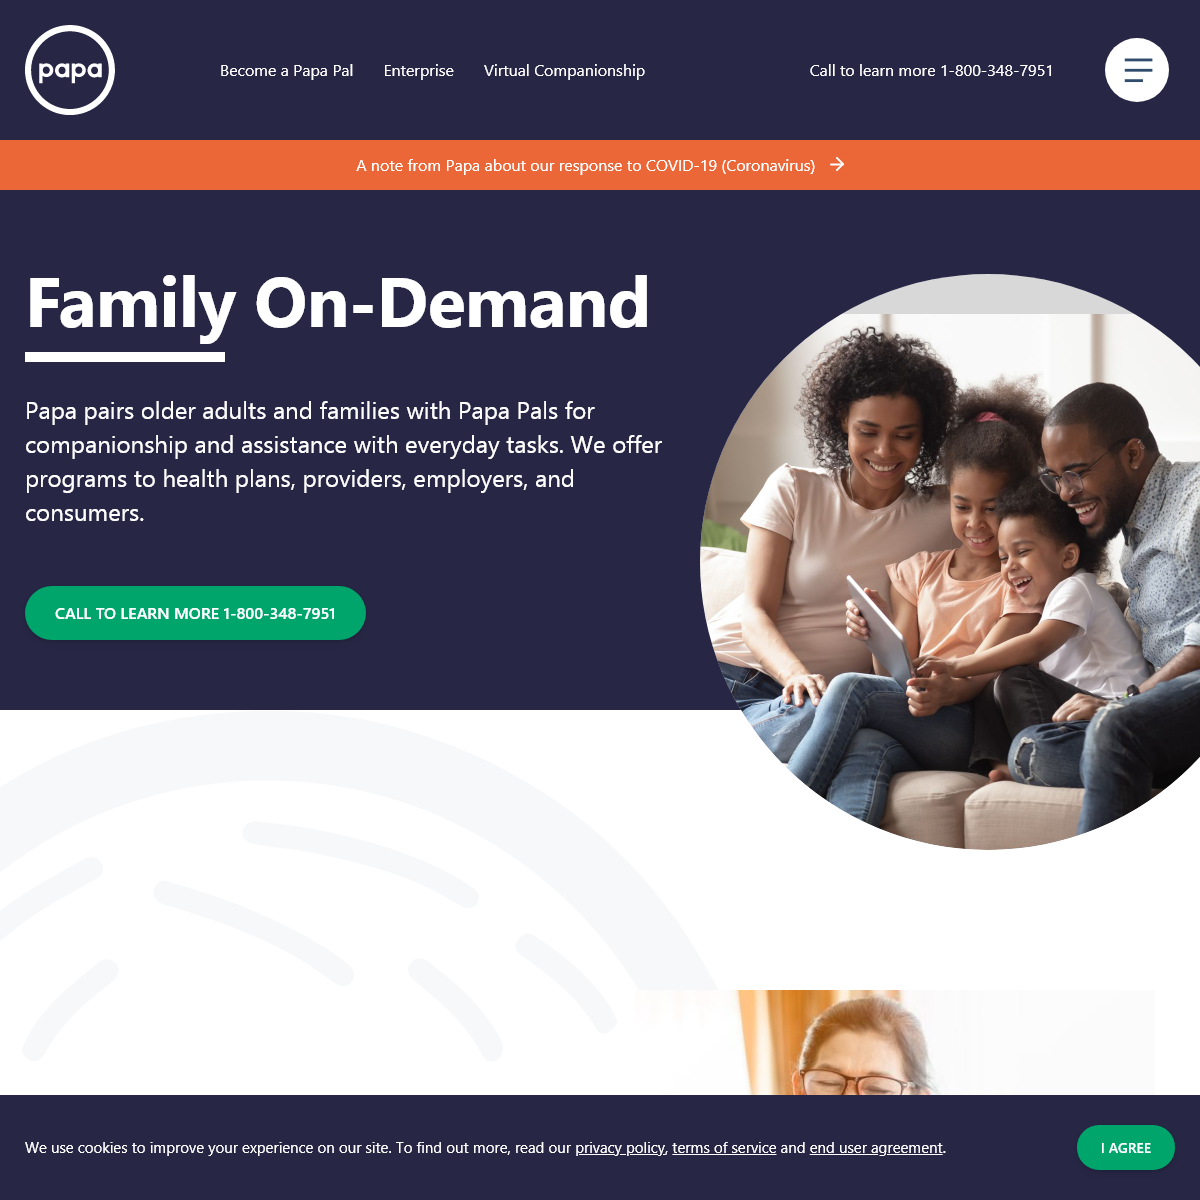 Papa - Family On-Demand - Assistance and Socialization for Seniors